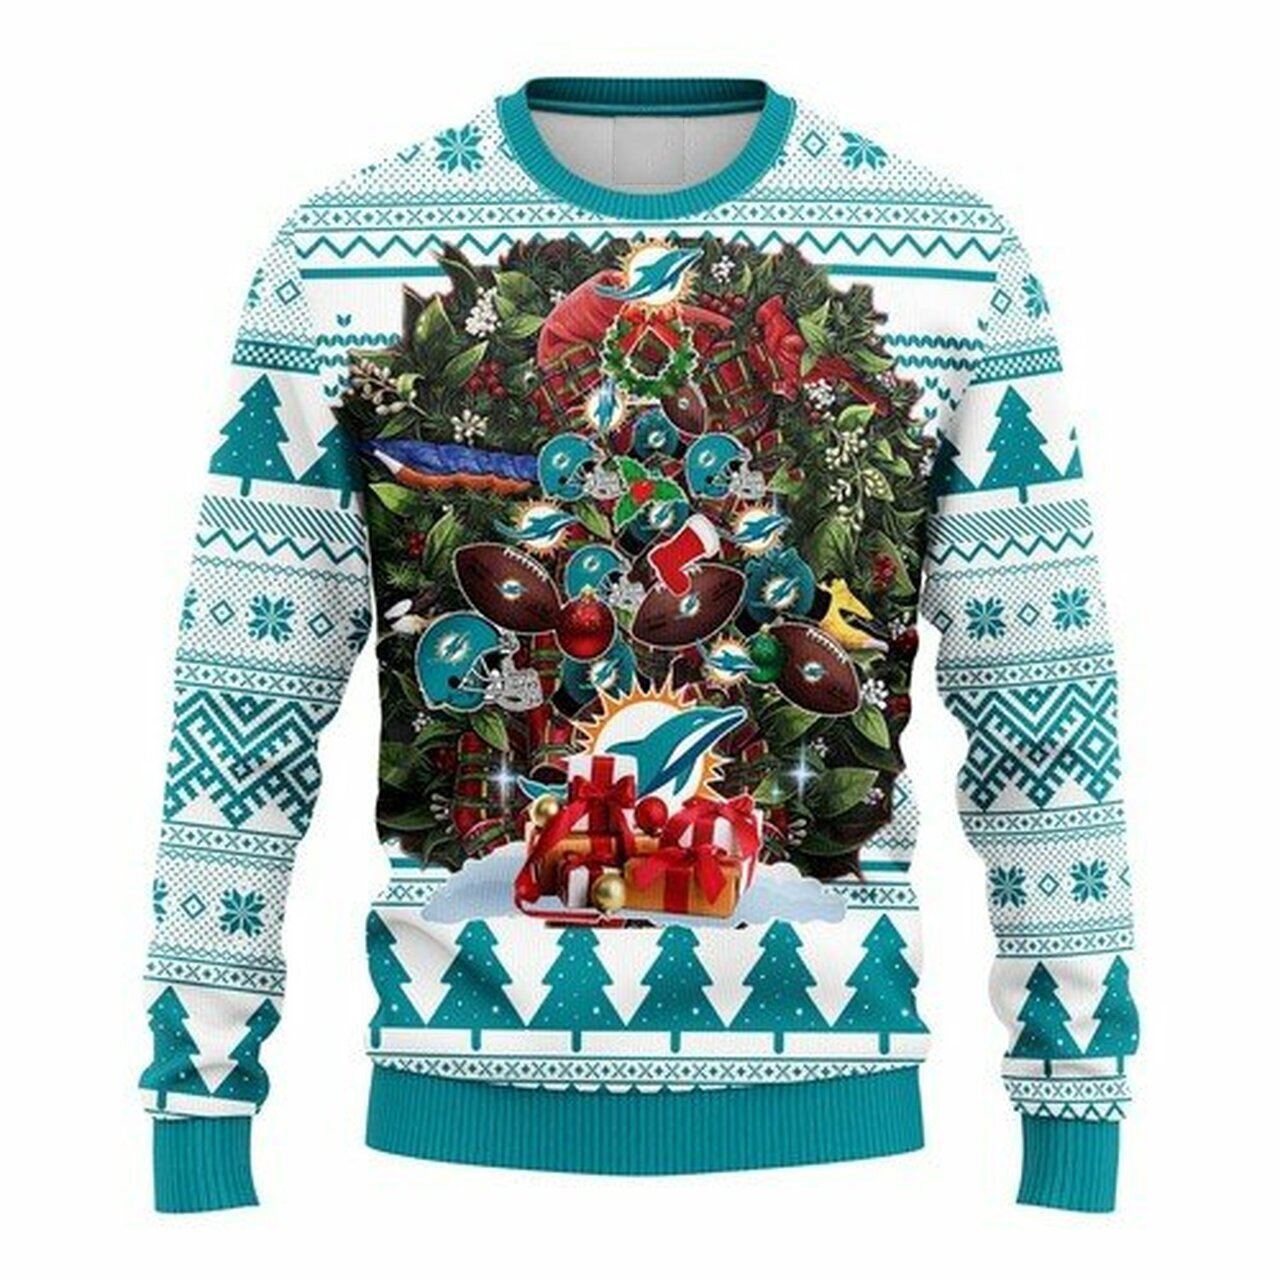 [ HOT ] NFL Miami Dolphins christmas tree ugly sweater – Saleoff 030122